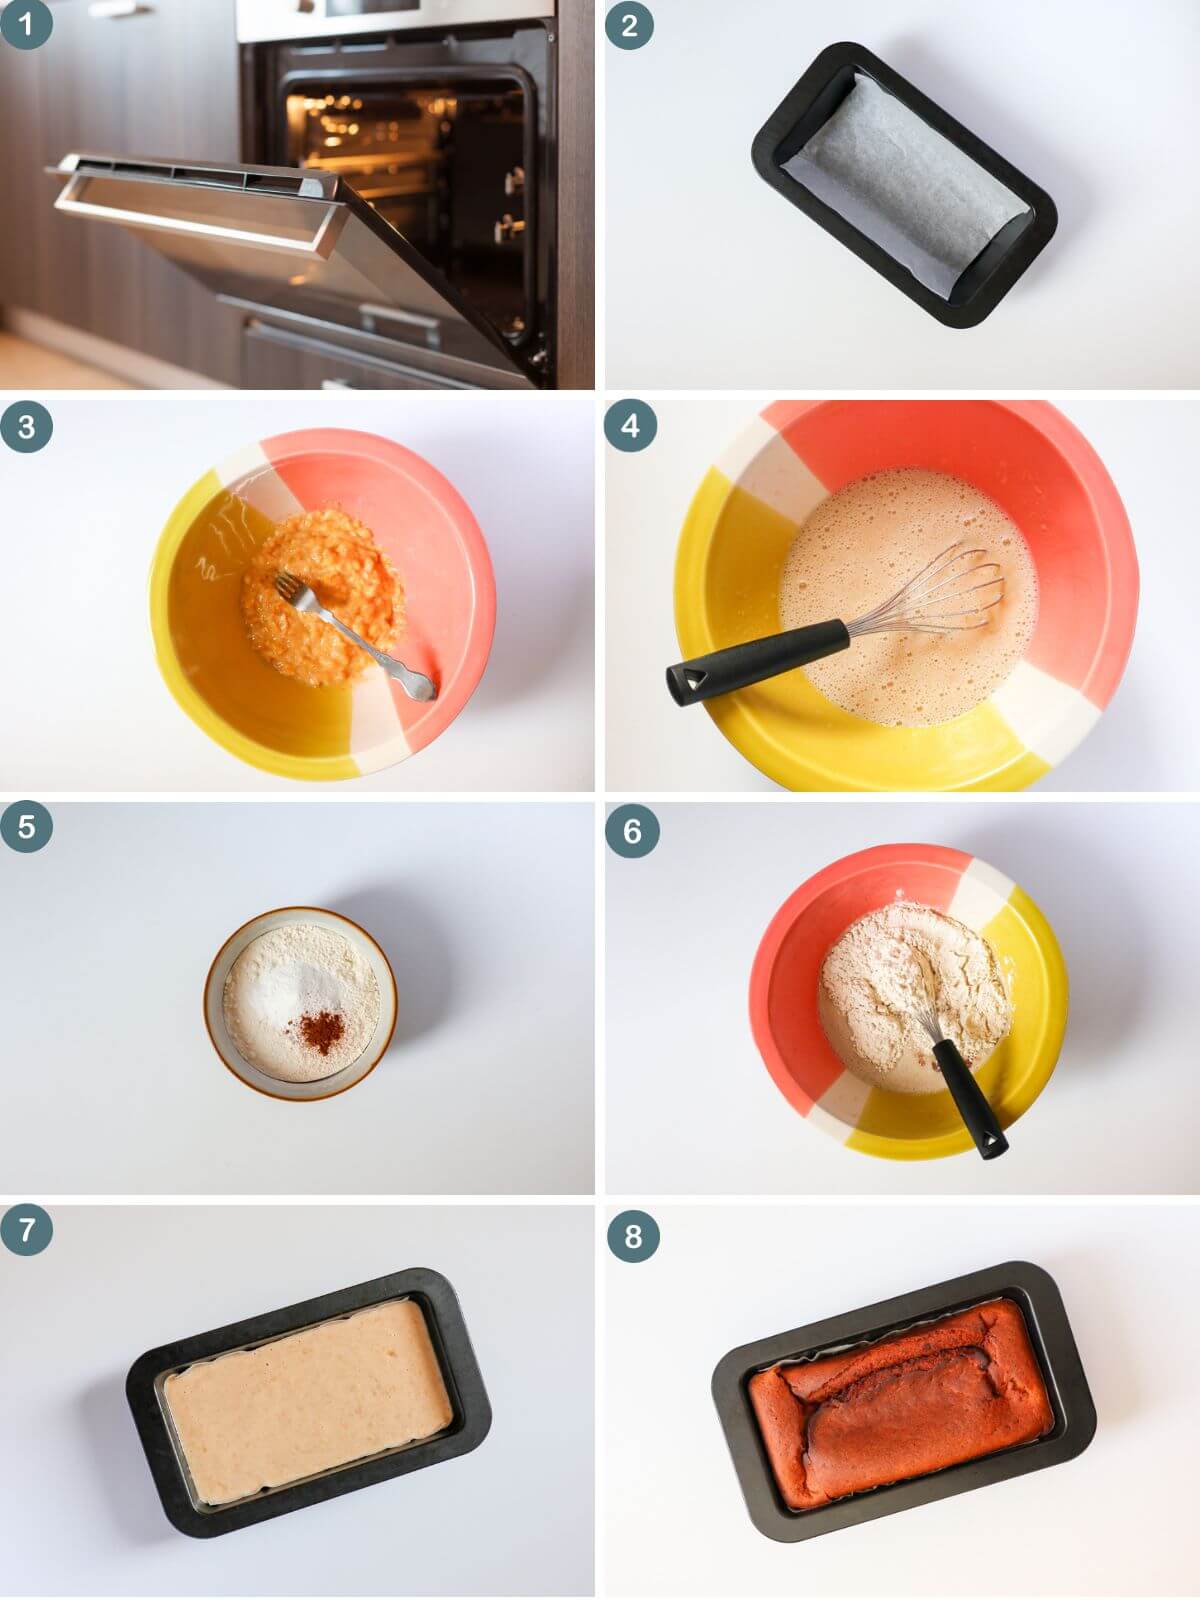 collage of 8 images showing how to make sugar-free banana bread.